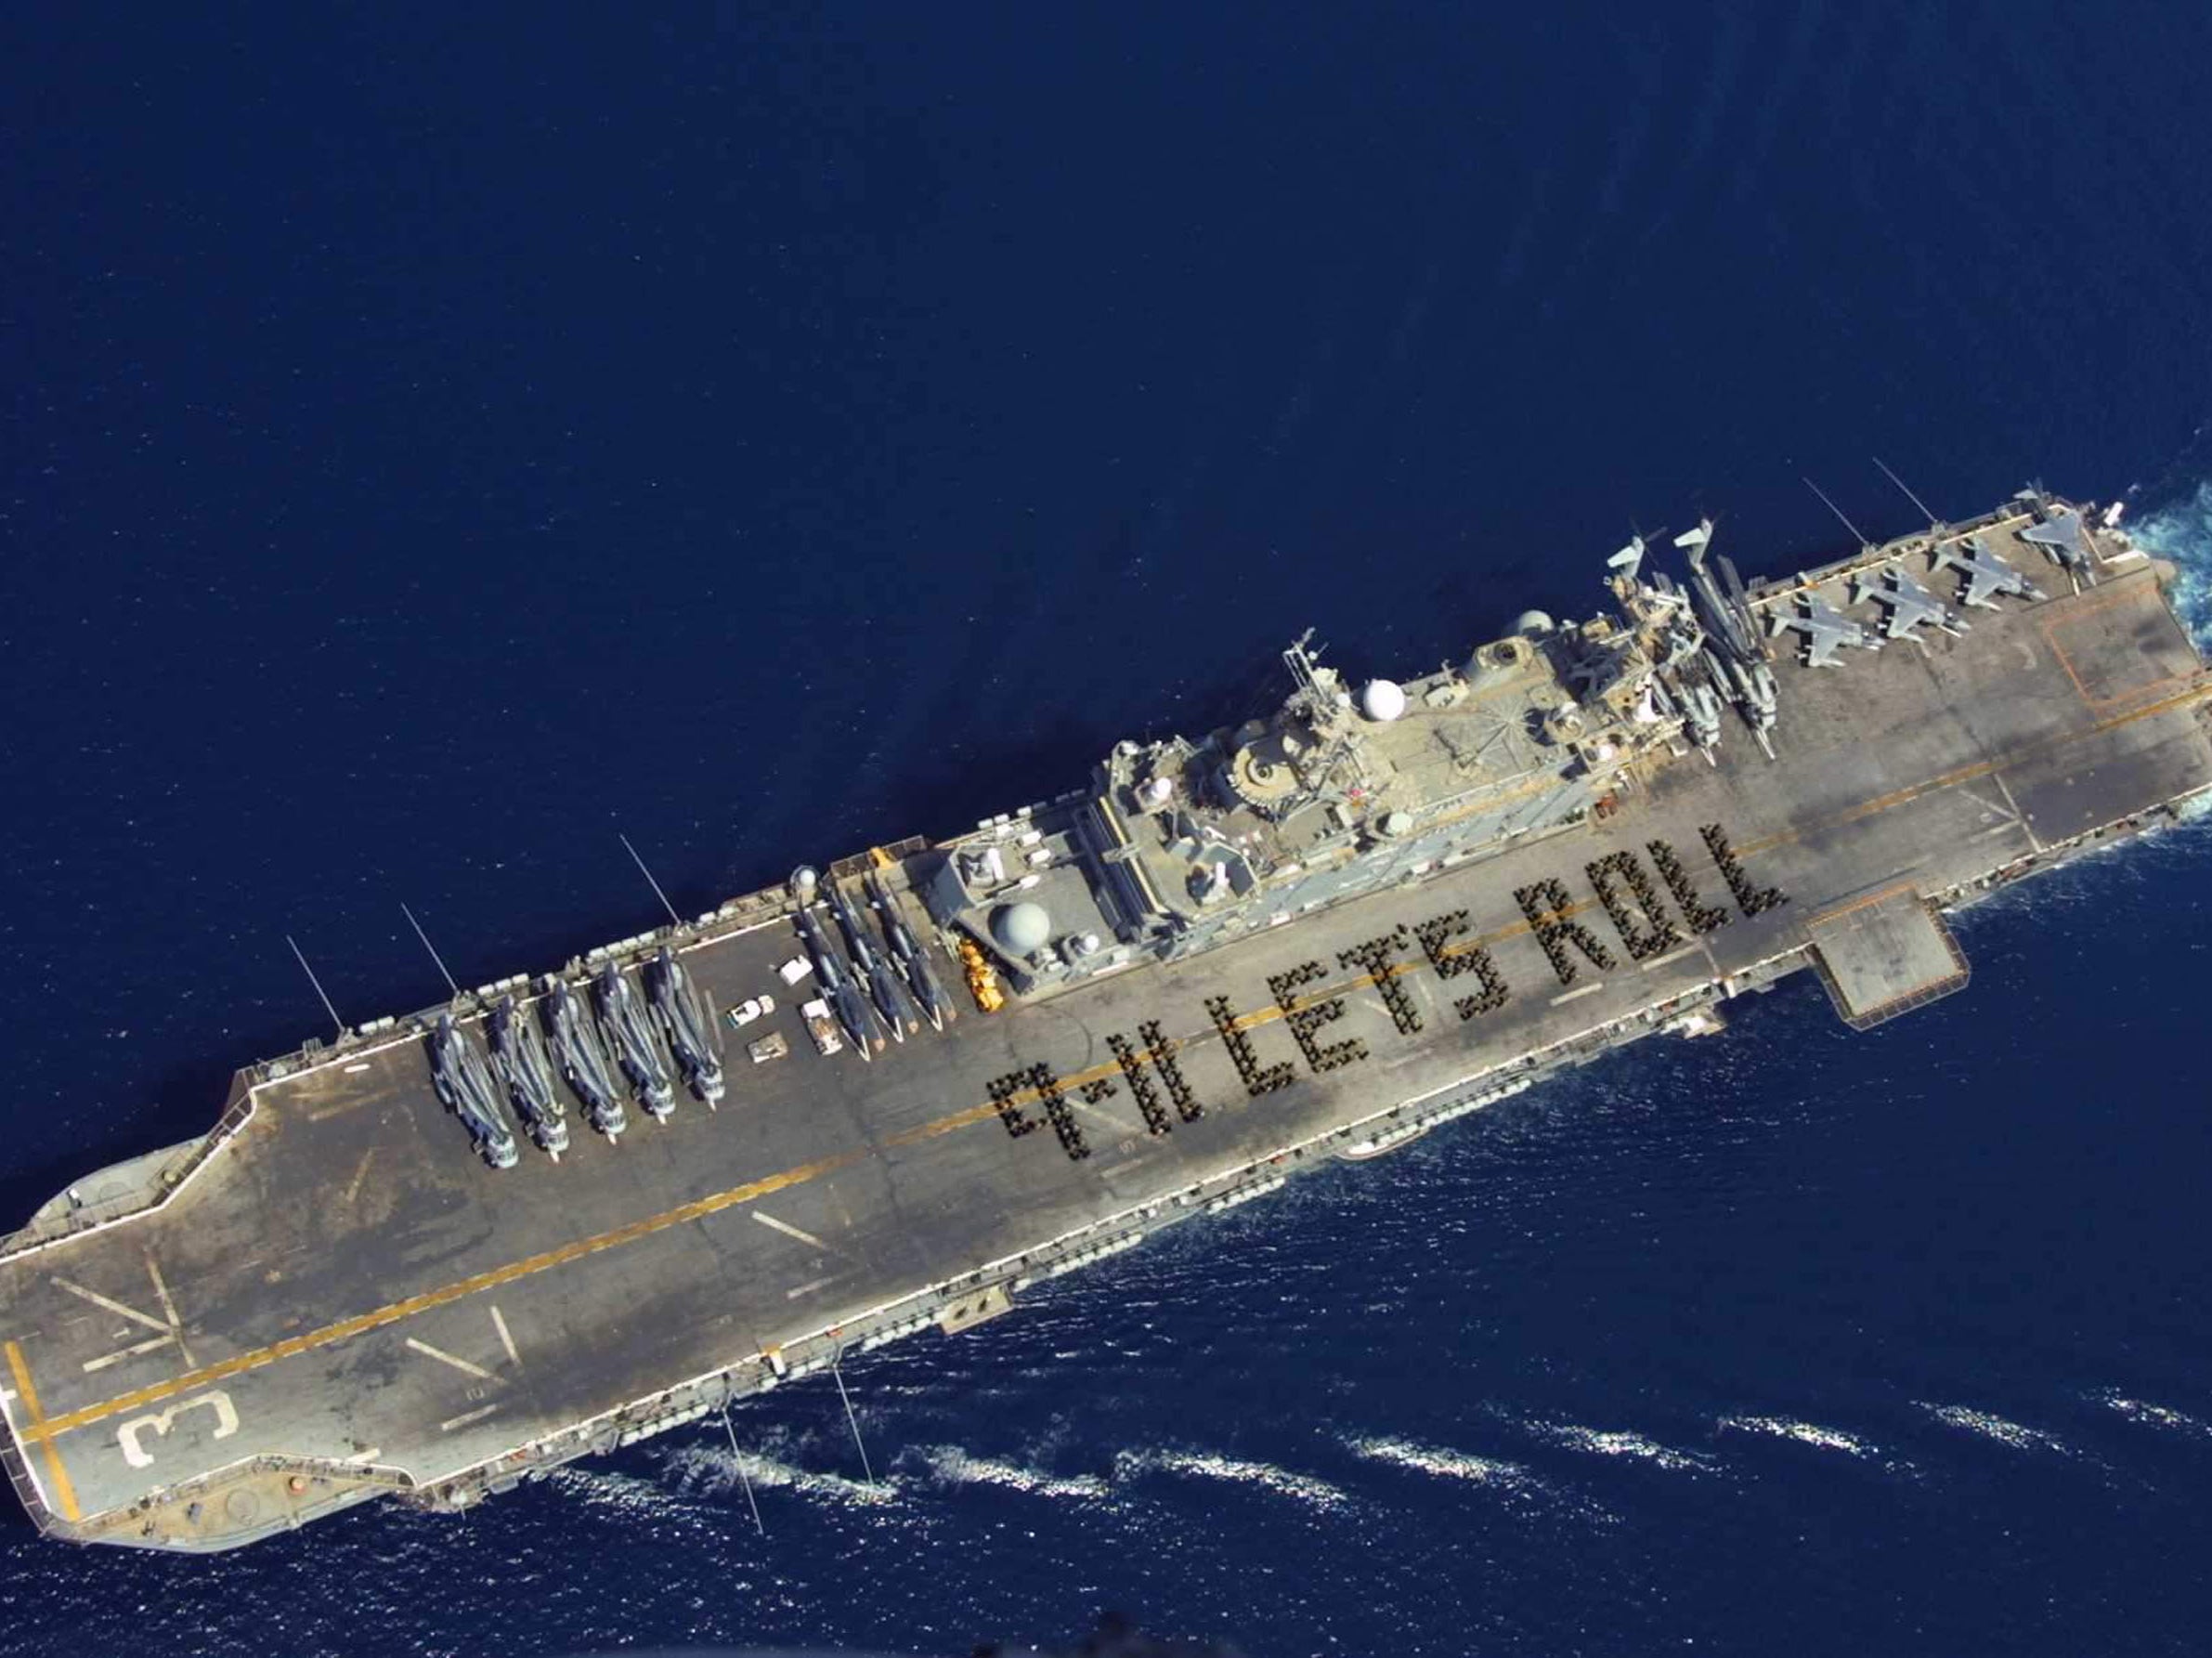 More than 500 Marines and Sailors spell out the now famous quote from Todd Beamer, on the flight deck of a ship on 6 September, 2002